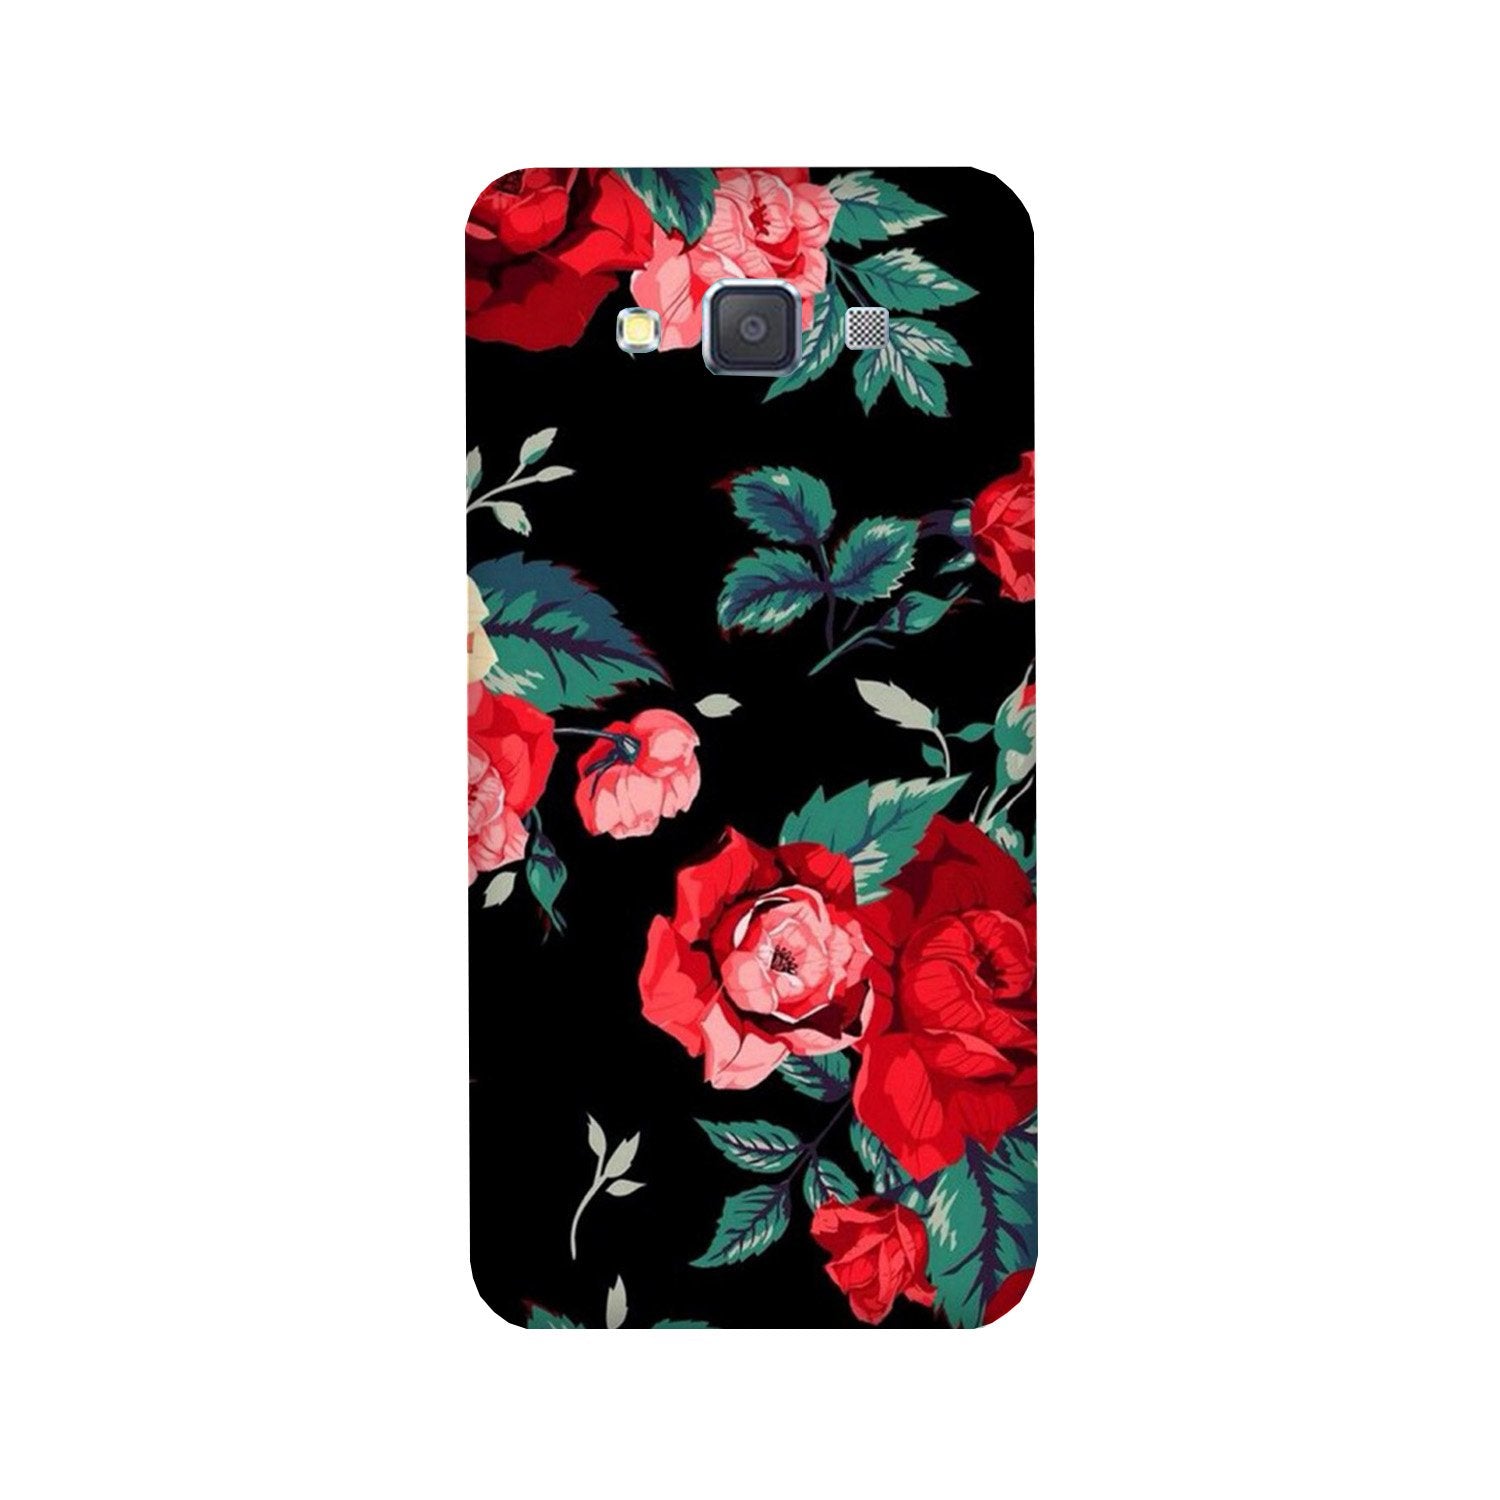 Red Rose2 Case for Galaxy A3 (2015)